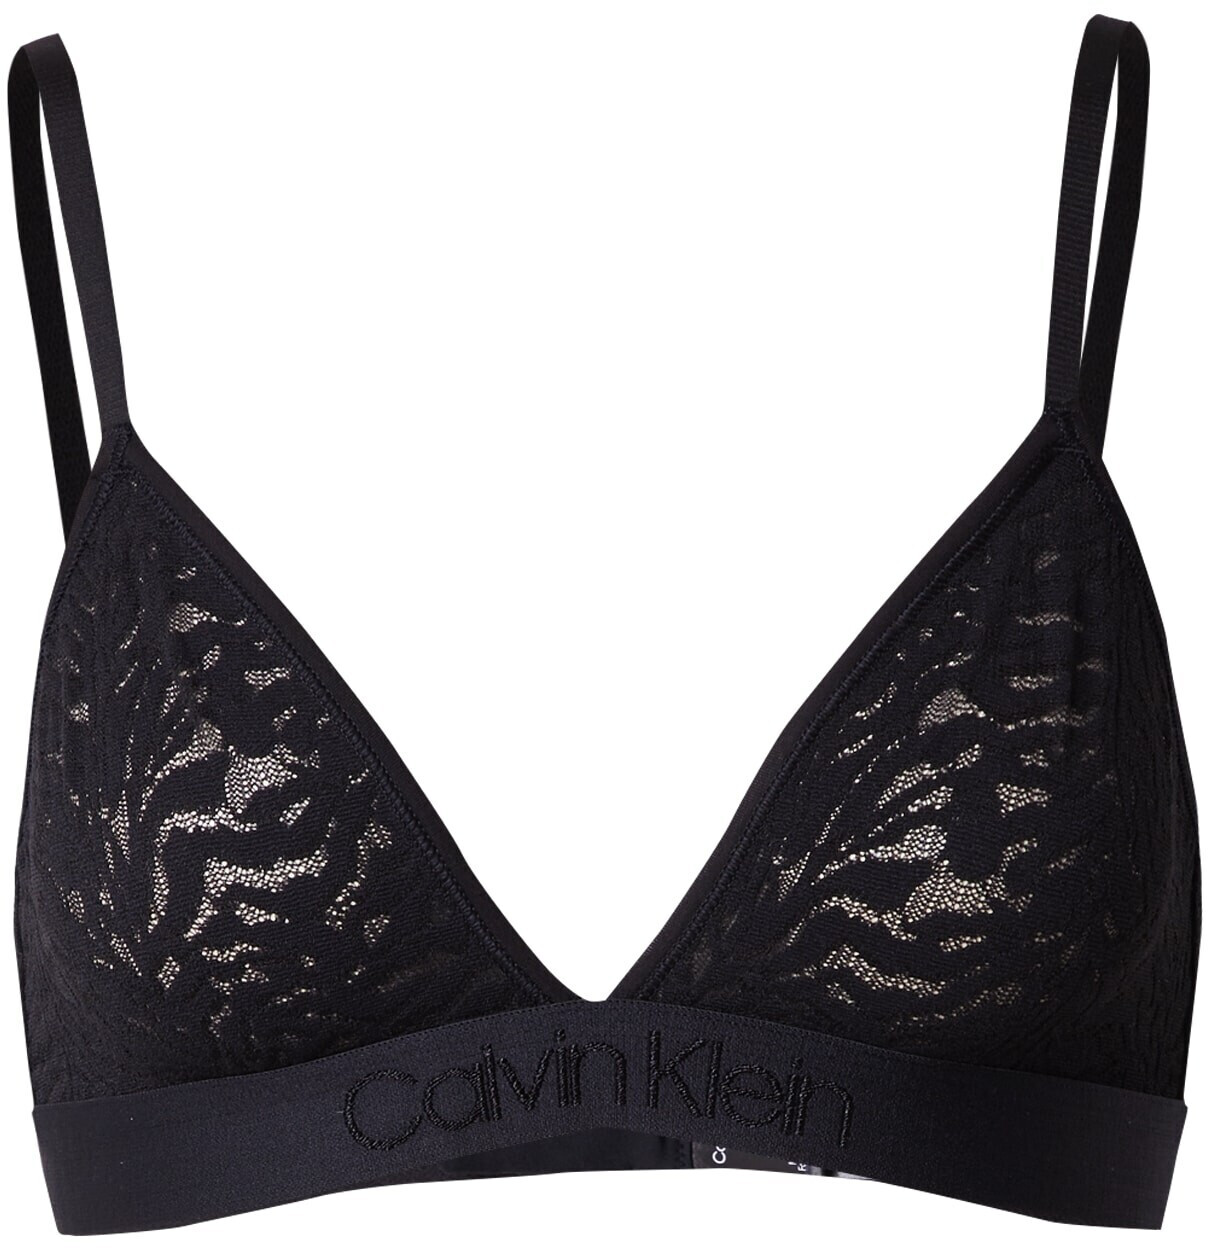 Buy Calvin Klein Unlined Triangle Intrinsic 000QF7491E black from £18.60  (Today) – Best Deals on